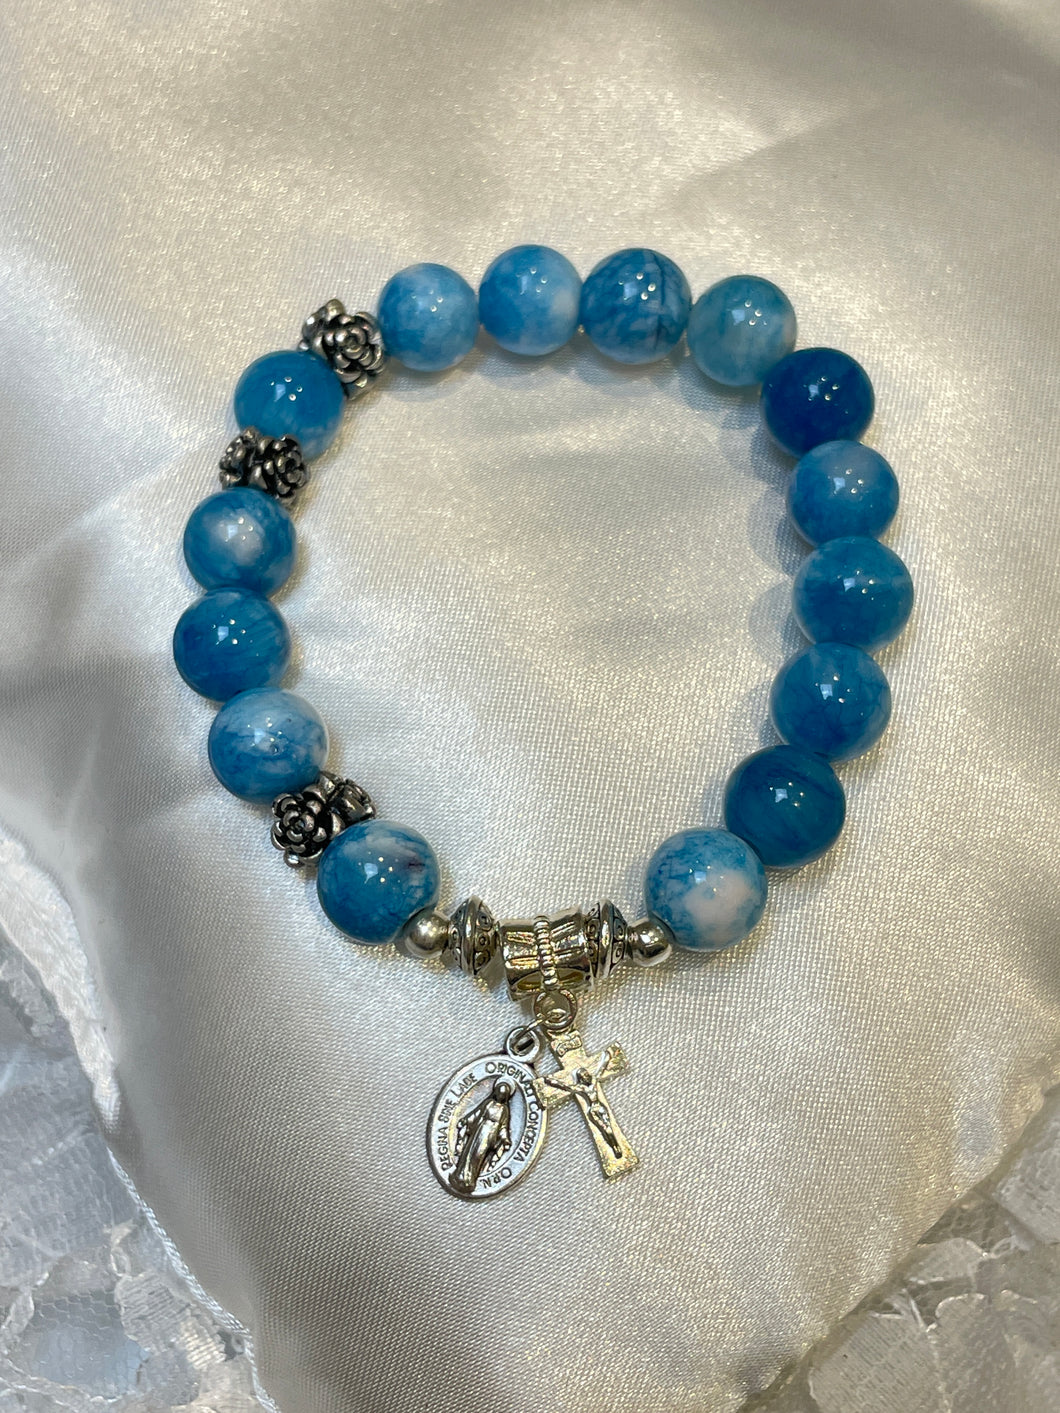 Blue and White Gemstone Rosary Bracelet with Miraculous Medal and Crucifix Charms